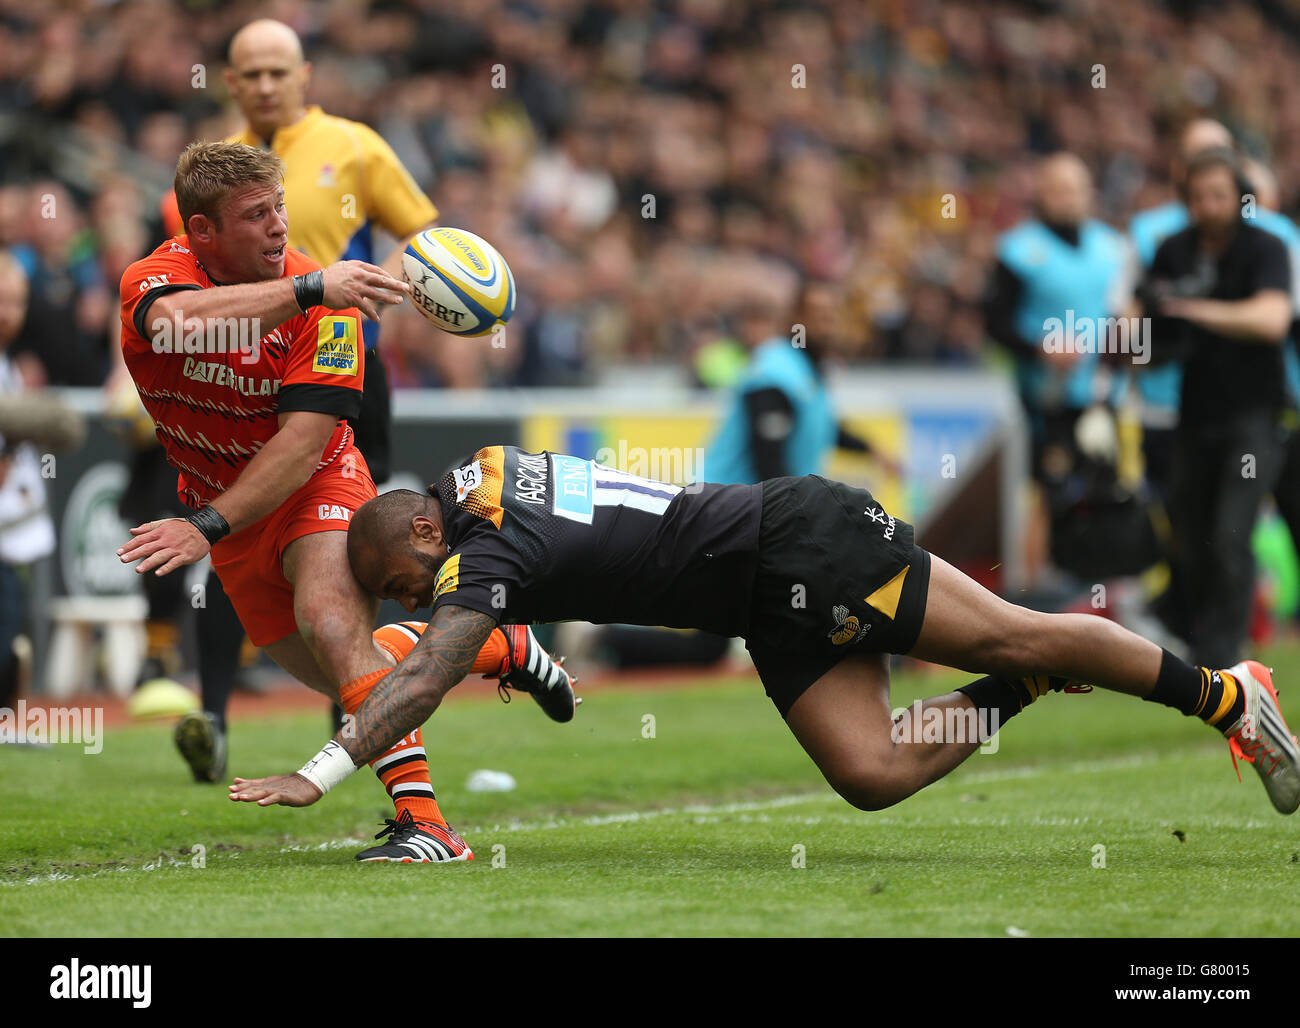 Rugby Union - Aviva Premiership - Wasps / Leicester Tigers - Ricoh Arena. Tom Youngs di Leicester Tigers viene affrontato Sailosi Tagicakibau di Wasps durante la partita Aviva Premiership alla Ricoh Arena di Coventry. Foto Stock